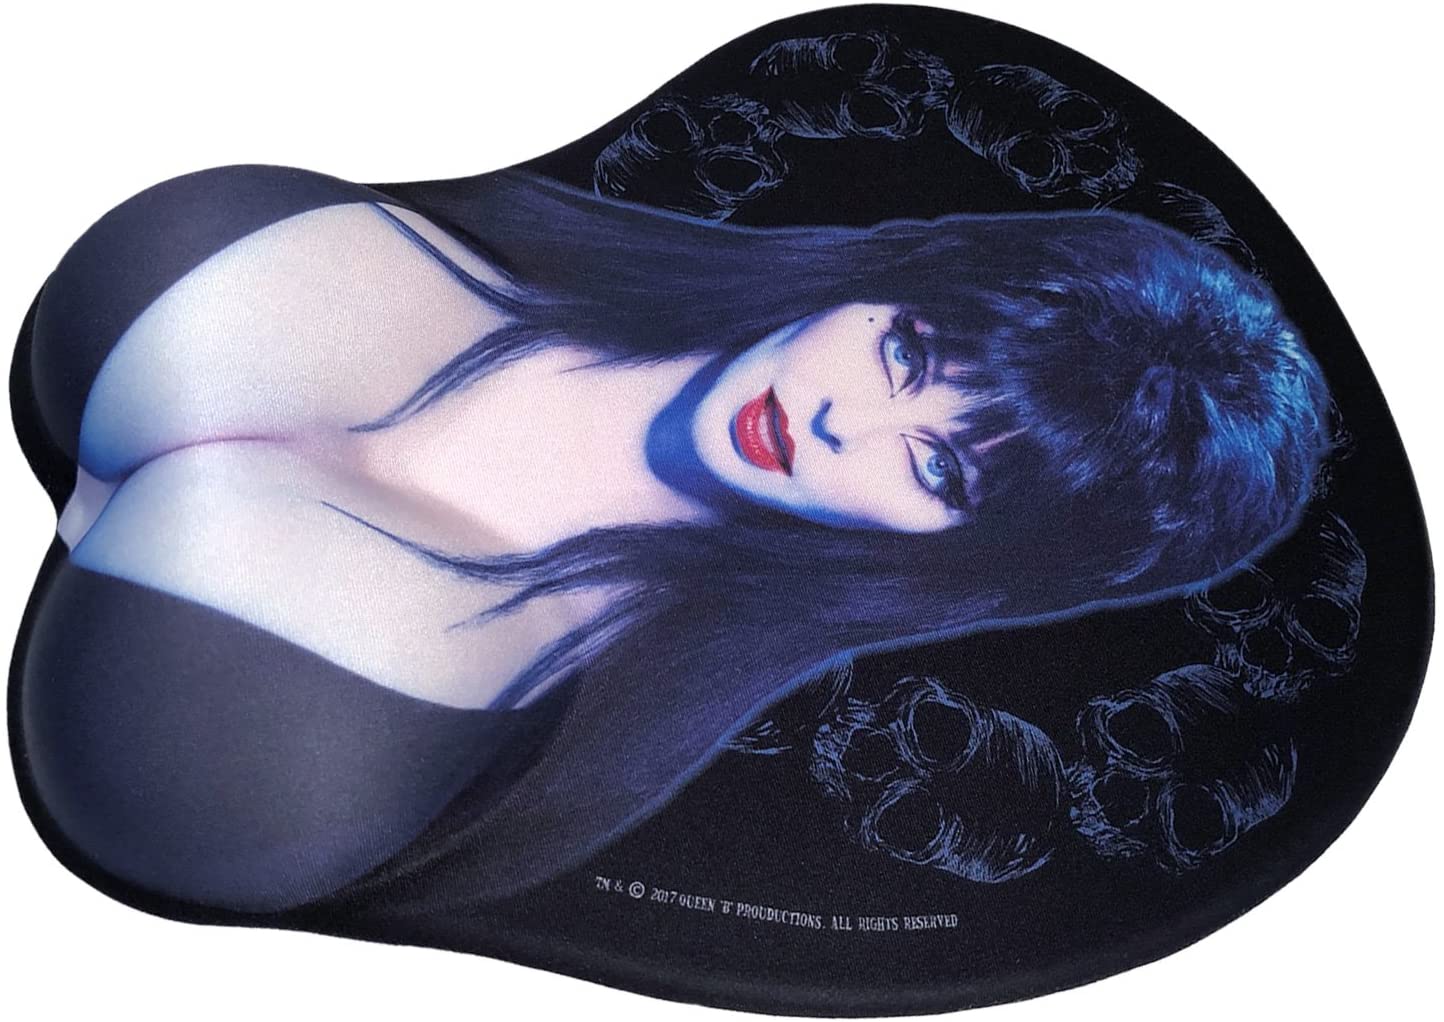 Elvira Mouse Pad Breast Deal on the internet